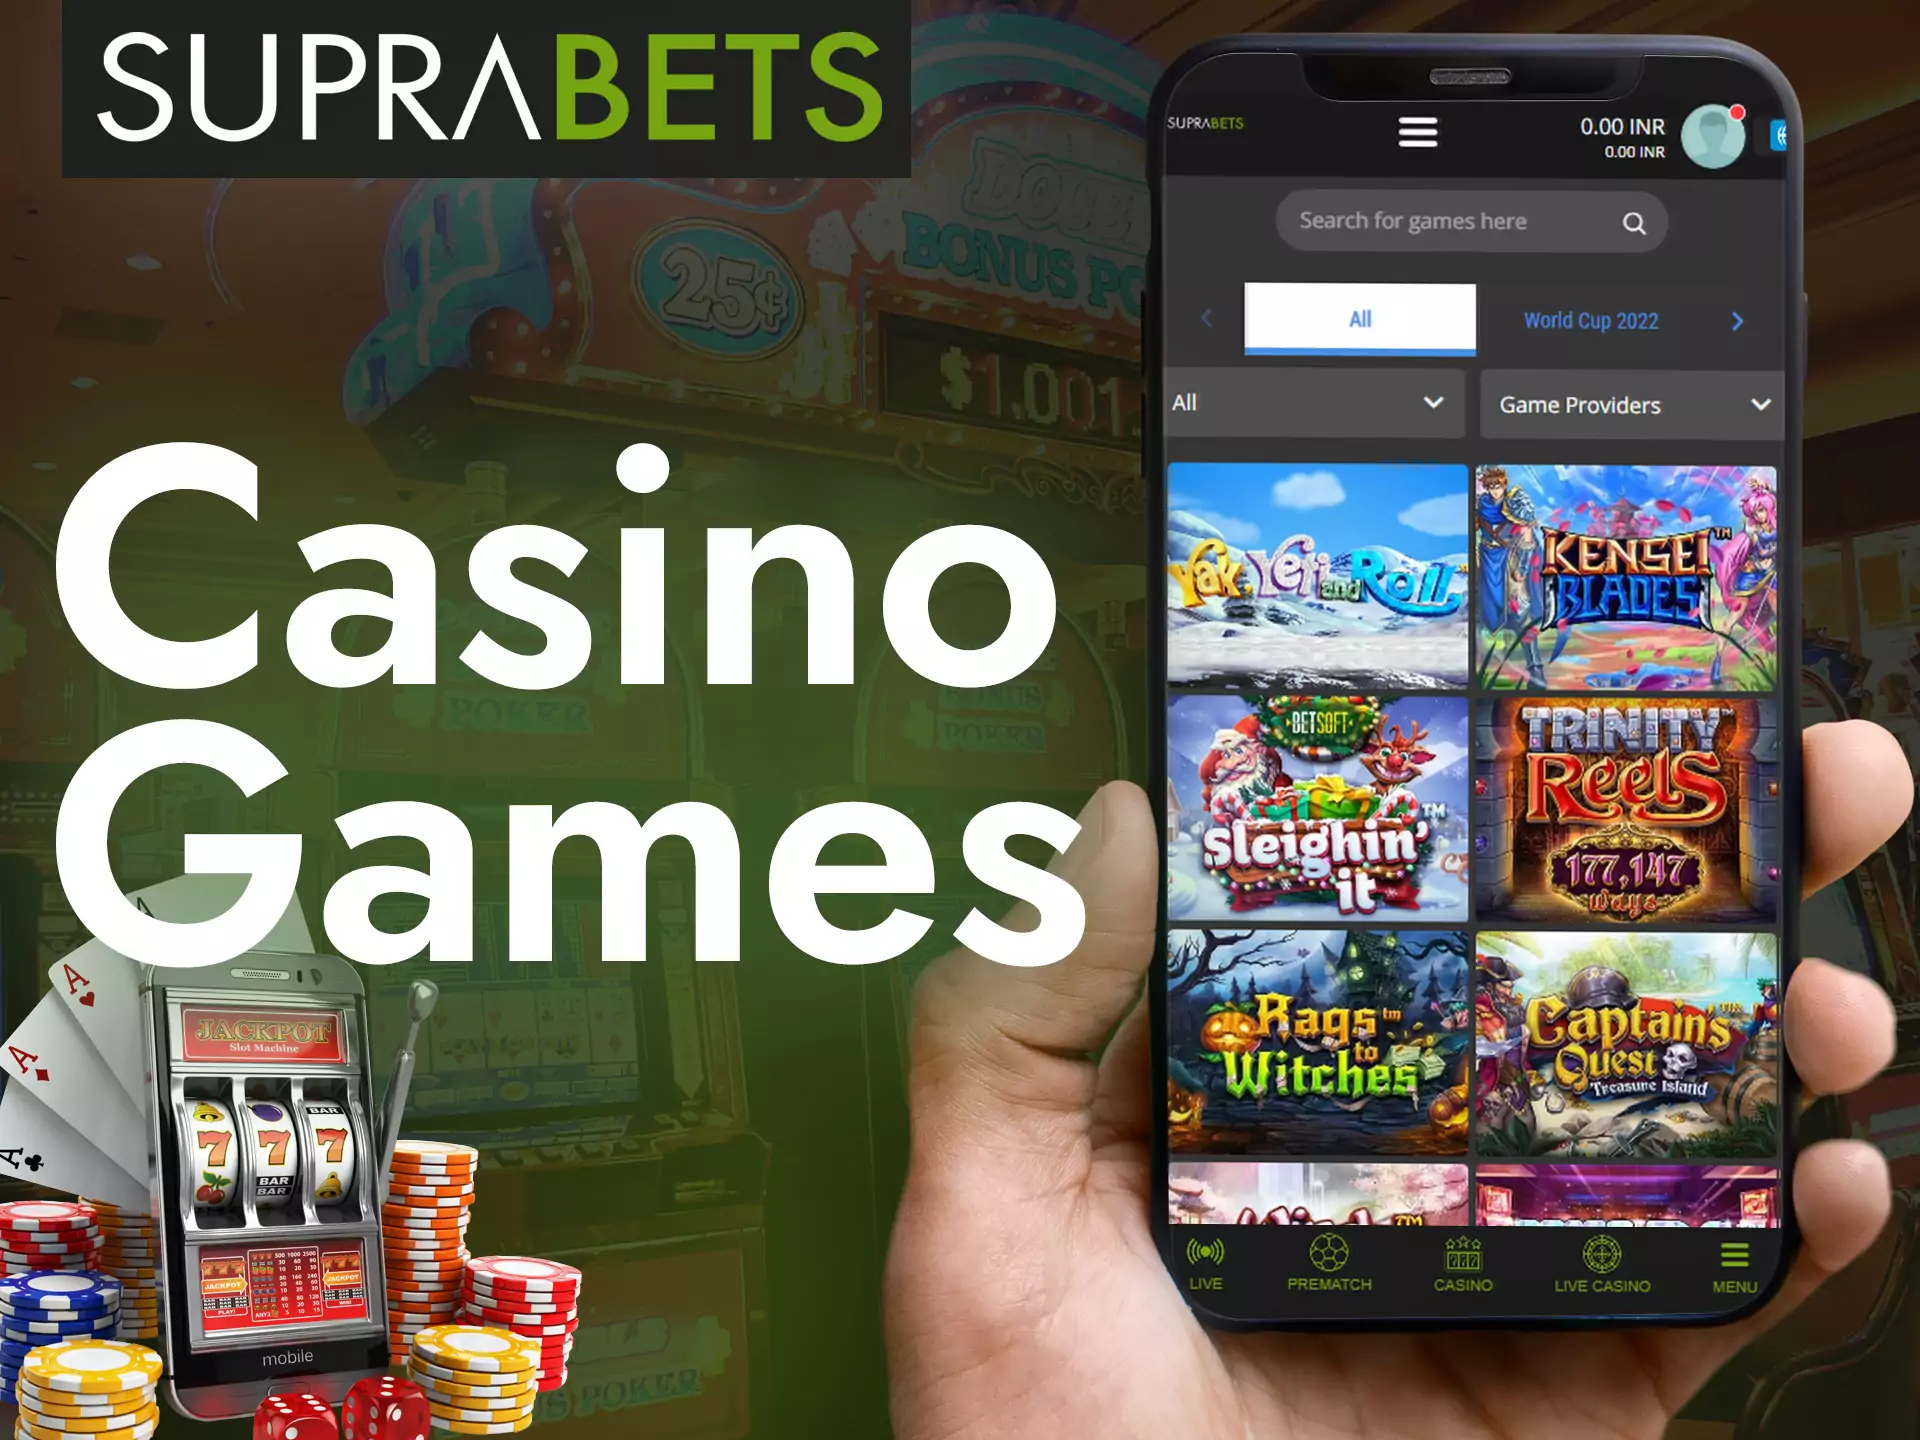 Choose a game at Suprabets casino according to your taste, there will be everything.